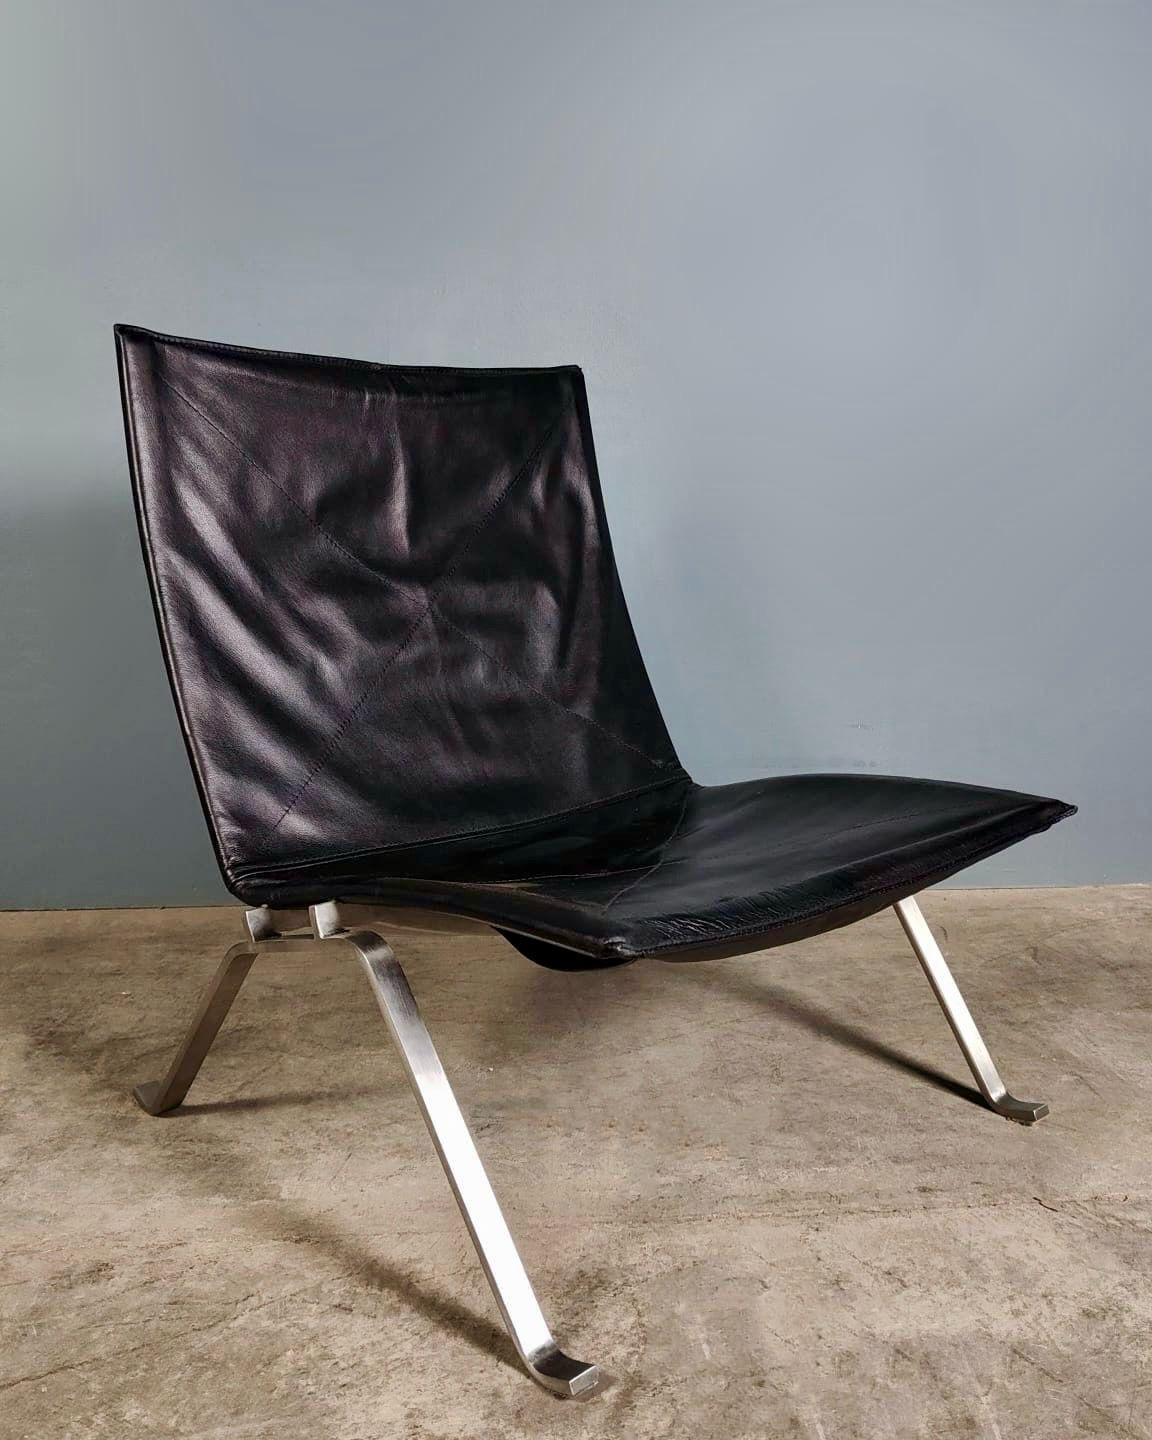 New Stock ✅

Poul Kjærholm After PK22 Chair 1980 By Fritz Hansen and Ejvind Kold Christensen in Black Leather and Brushed Steel.

Comes with sticker tag dating from 1980.

The discrete and elegant lounge chair PK22 epitomizes the work of Poul